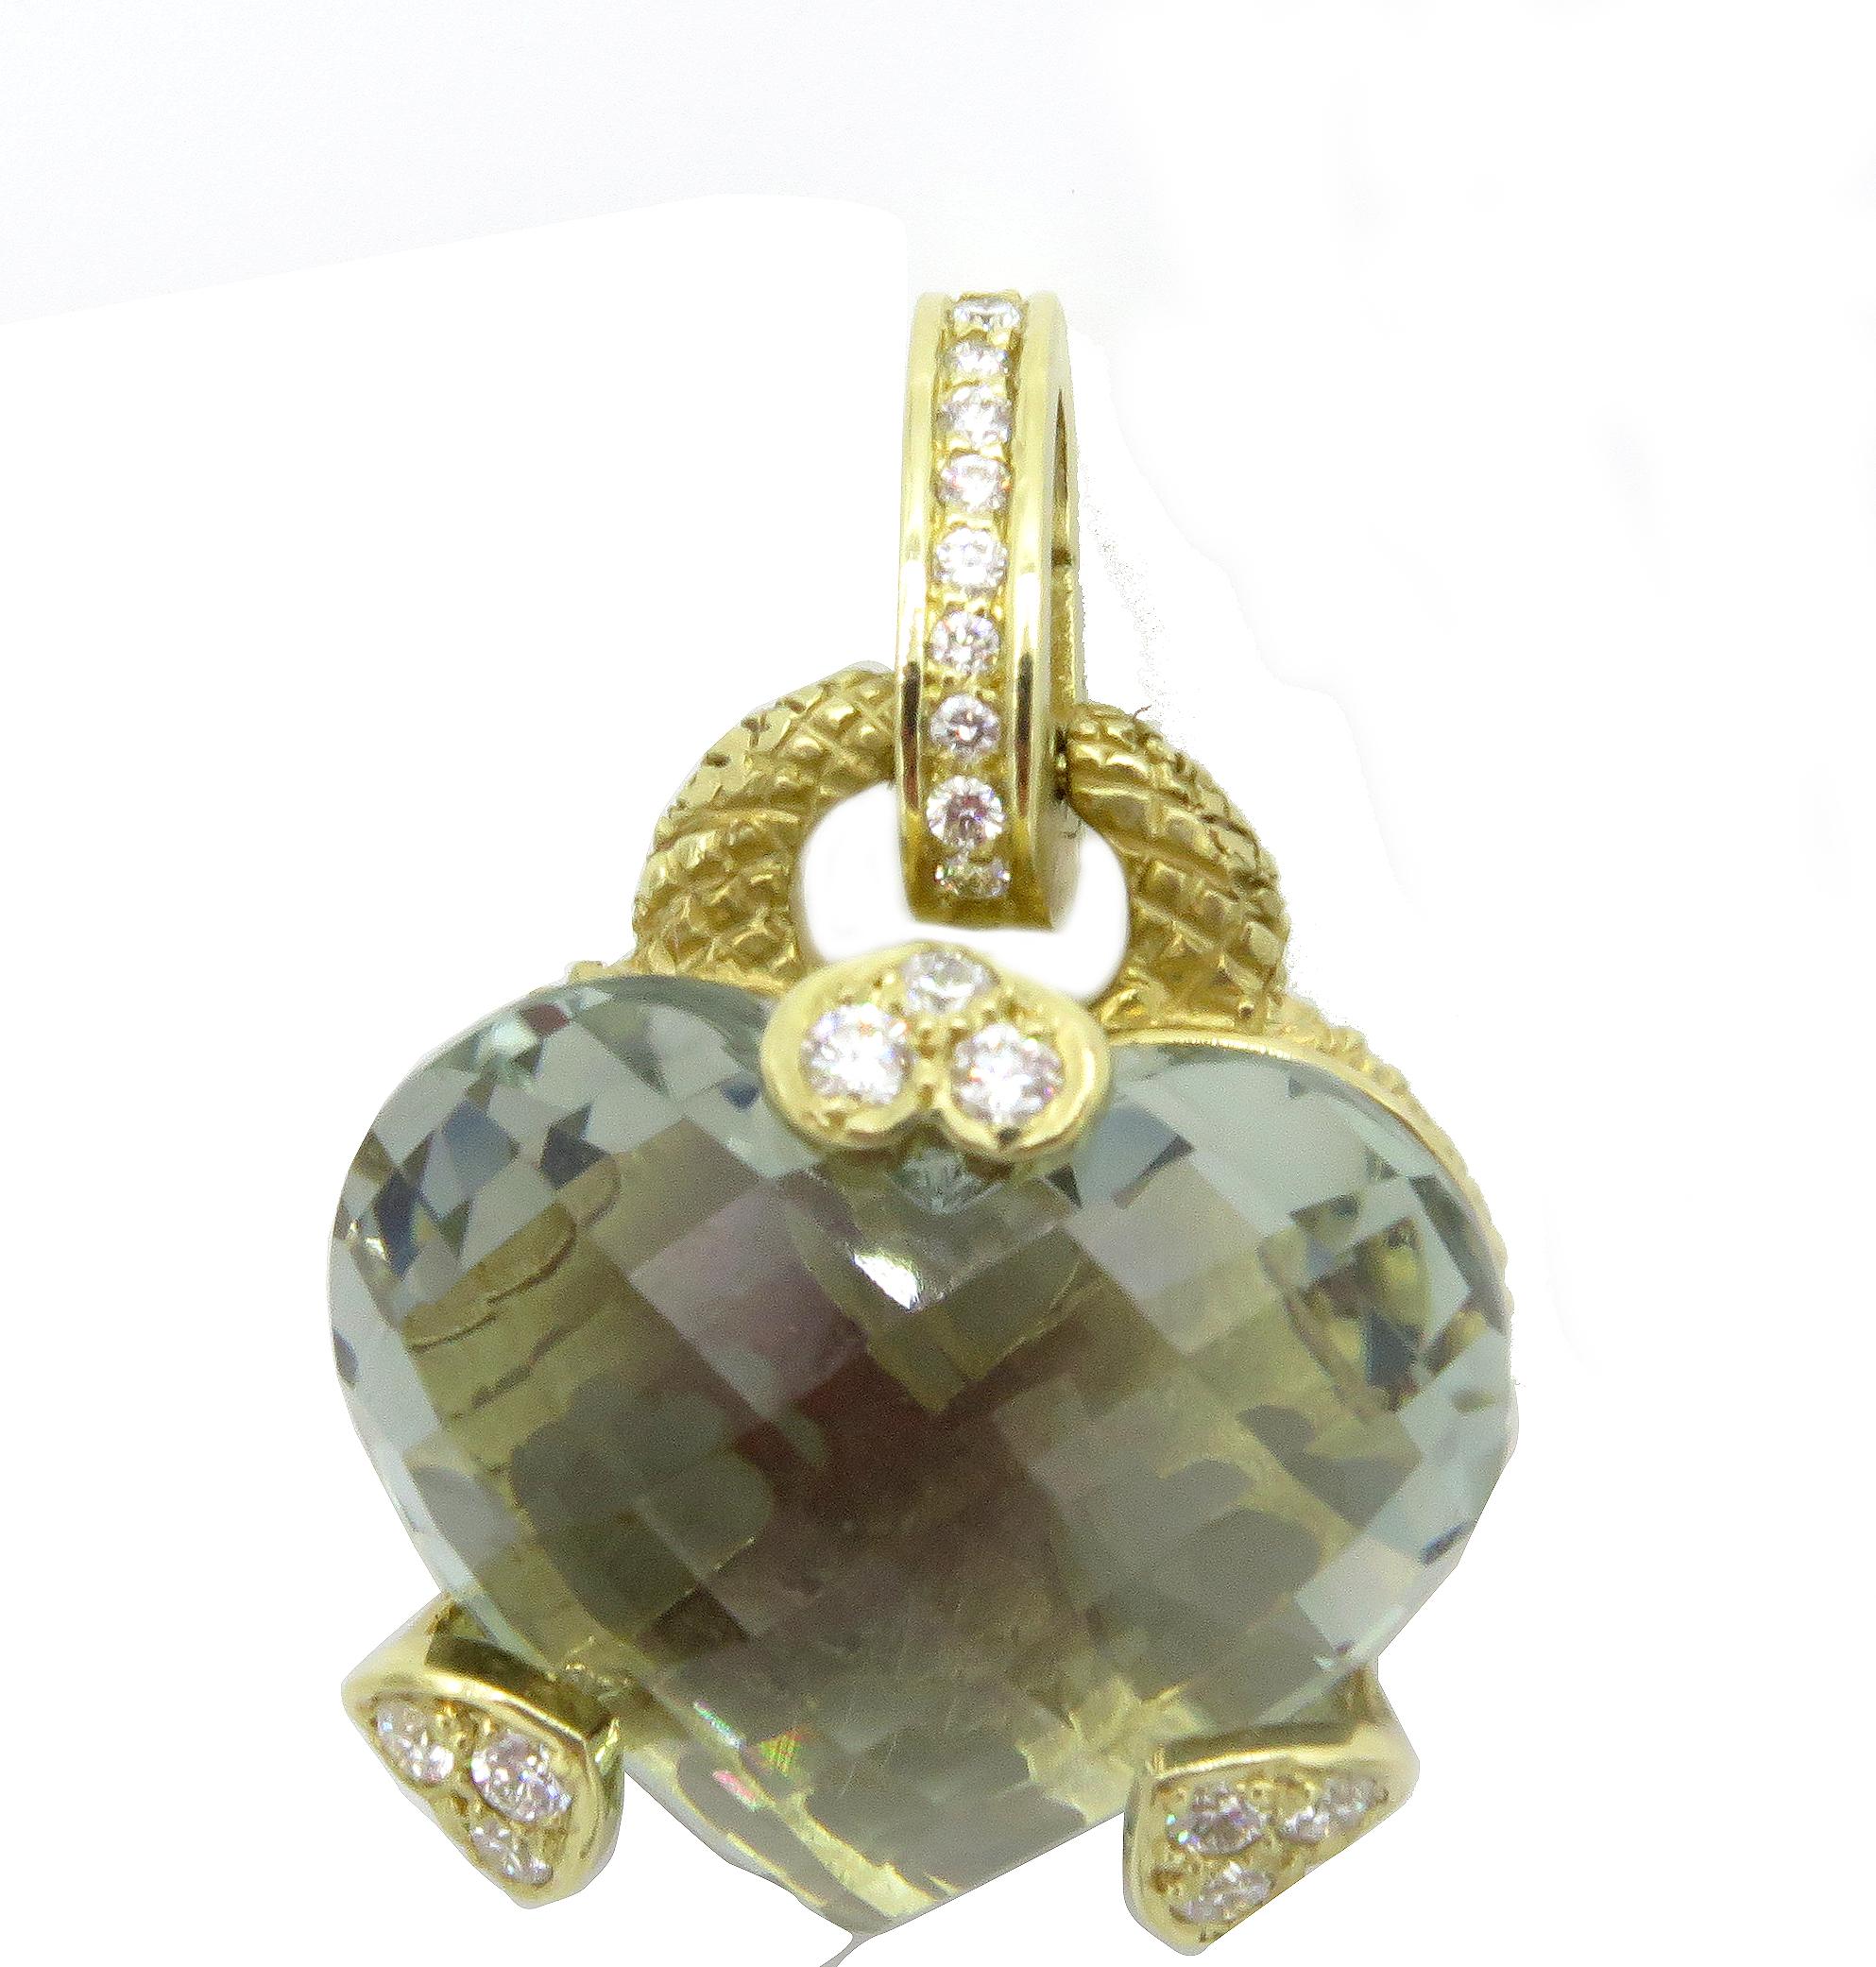 A lovely Judith Ripka 18k yellow gold heart pendent from the Judith Ripka Fine Jewelry Collection. Showcasing a stunning heart shaped prasiolite, the pendant also features heart shaped gold prongs and a gold hinge ball accented with 0.27cts of round